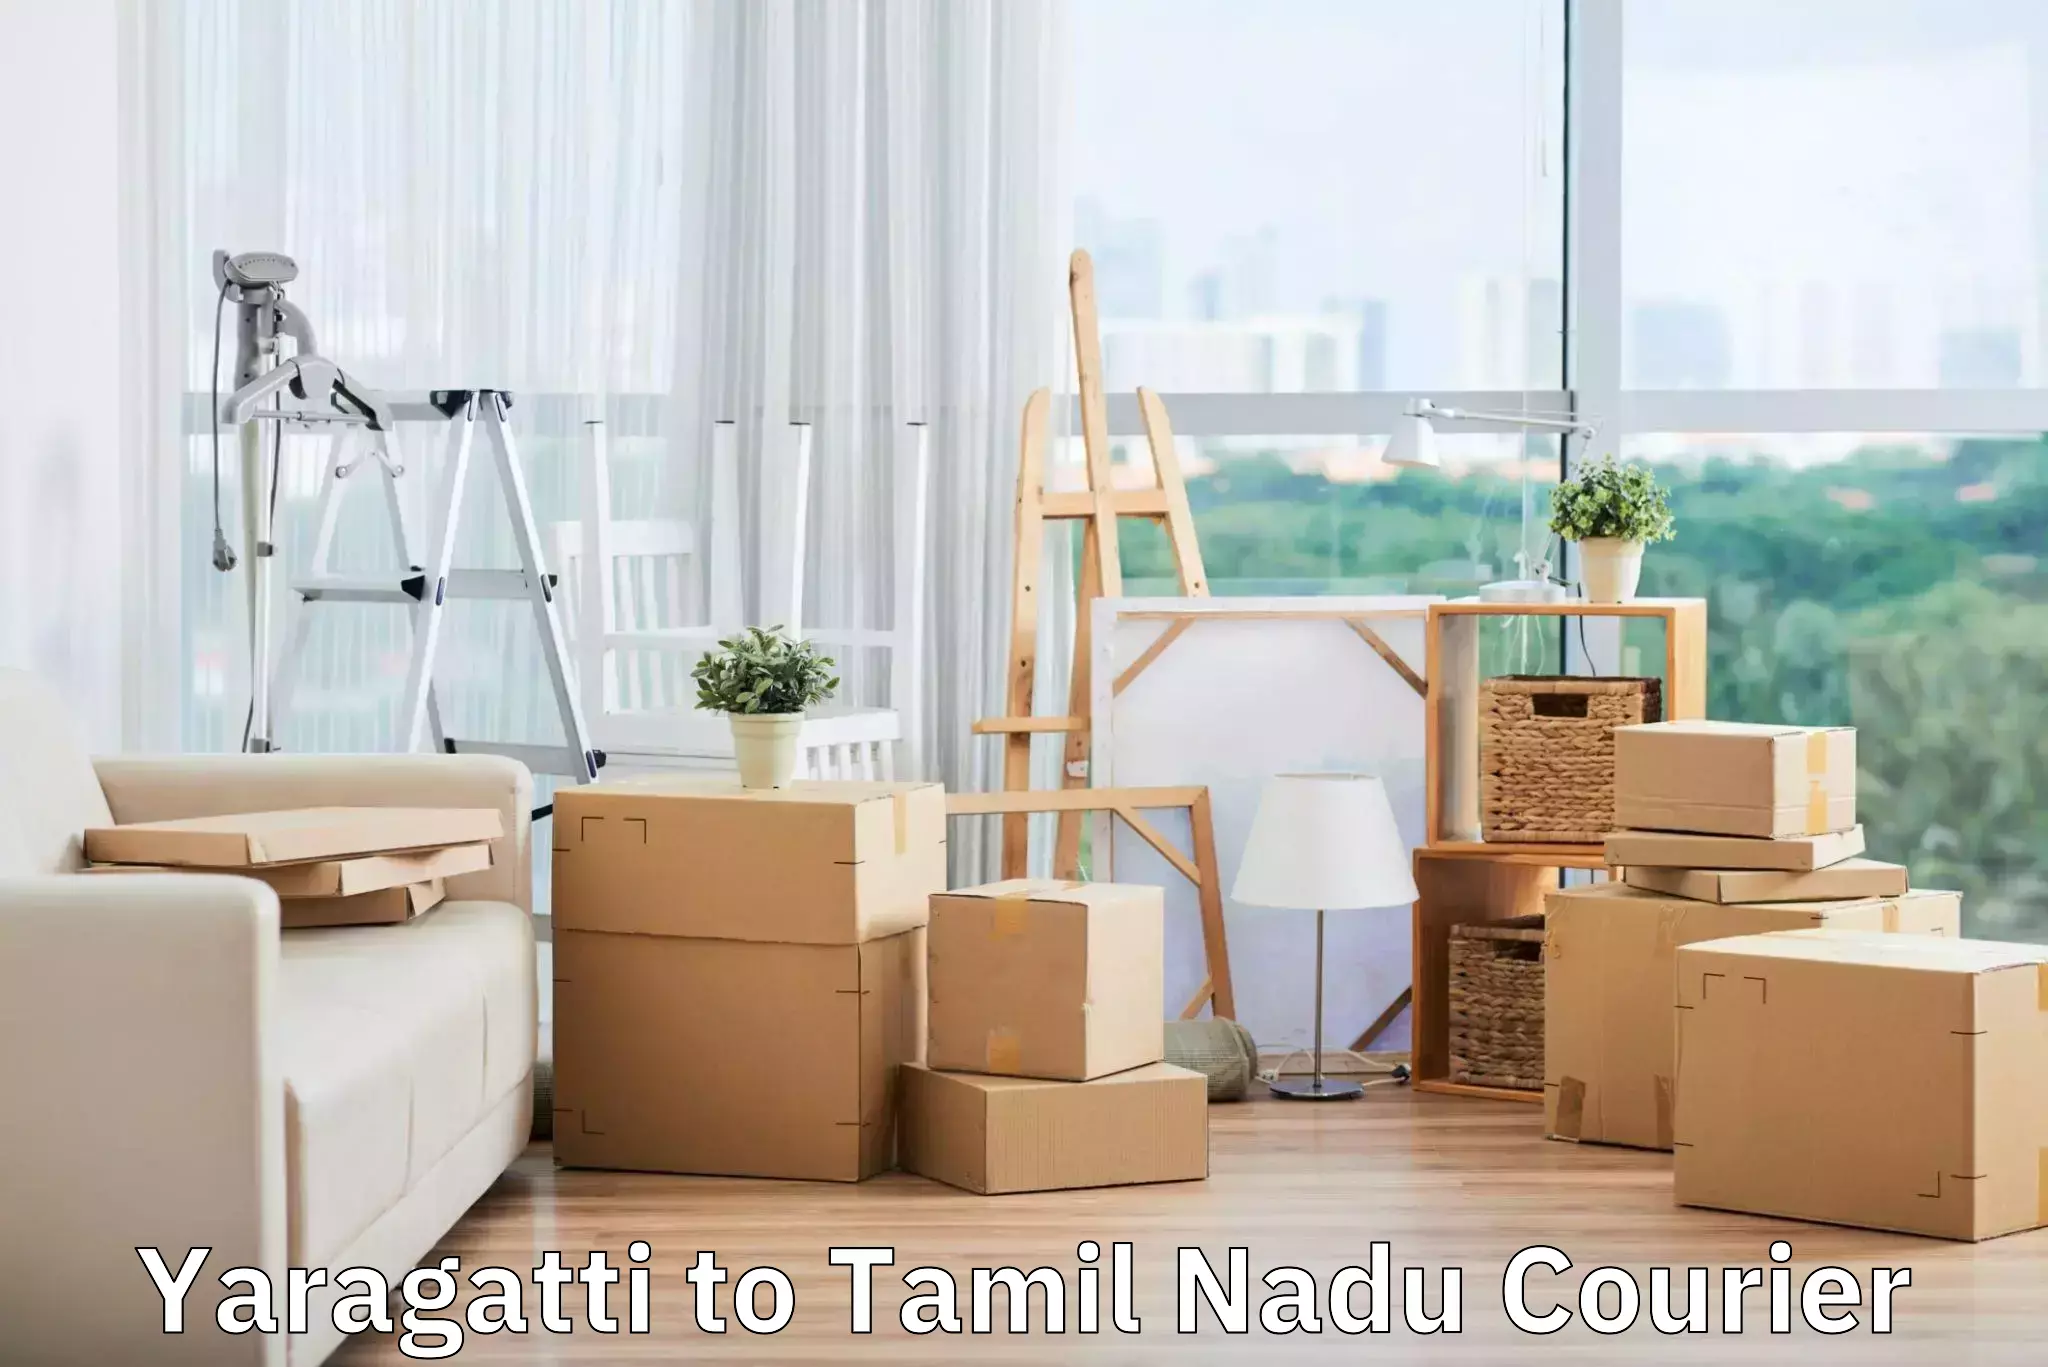 Luggage shipment specialists in Yaragatti to Erode